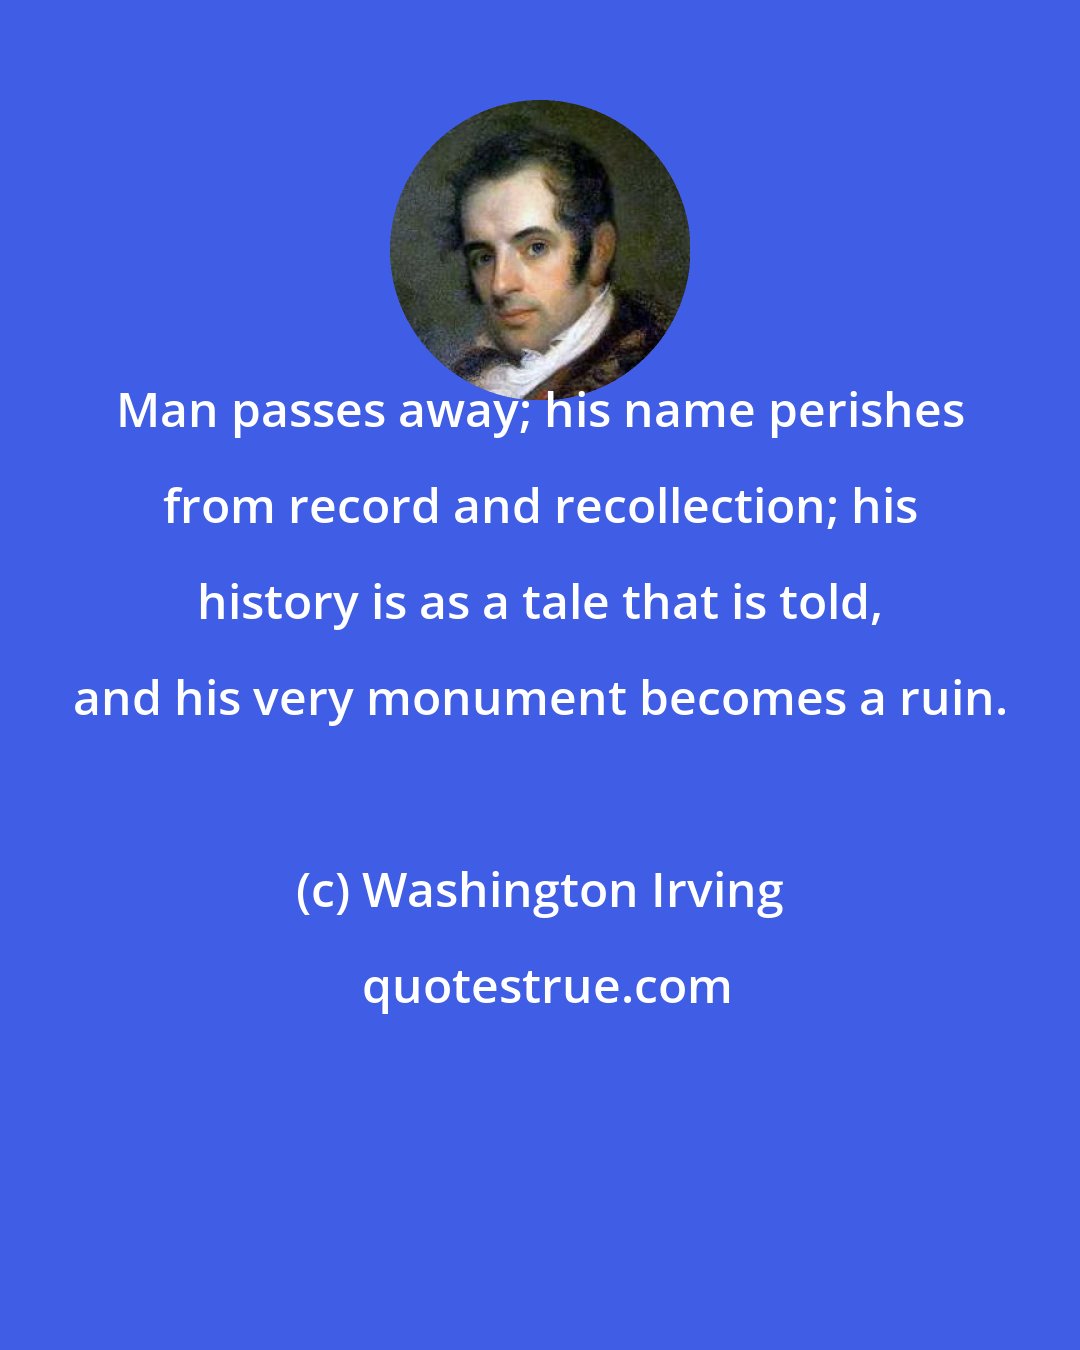 Washington Irving: Man passes away; his name perishes from record and recollection; his history is as a tale that is told, and his very monument becomes a ruin.